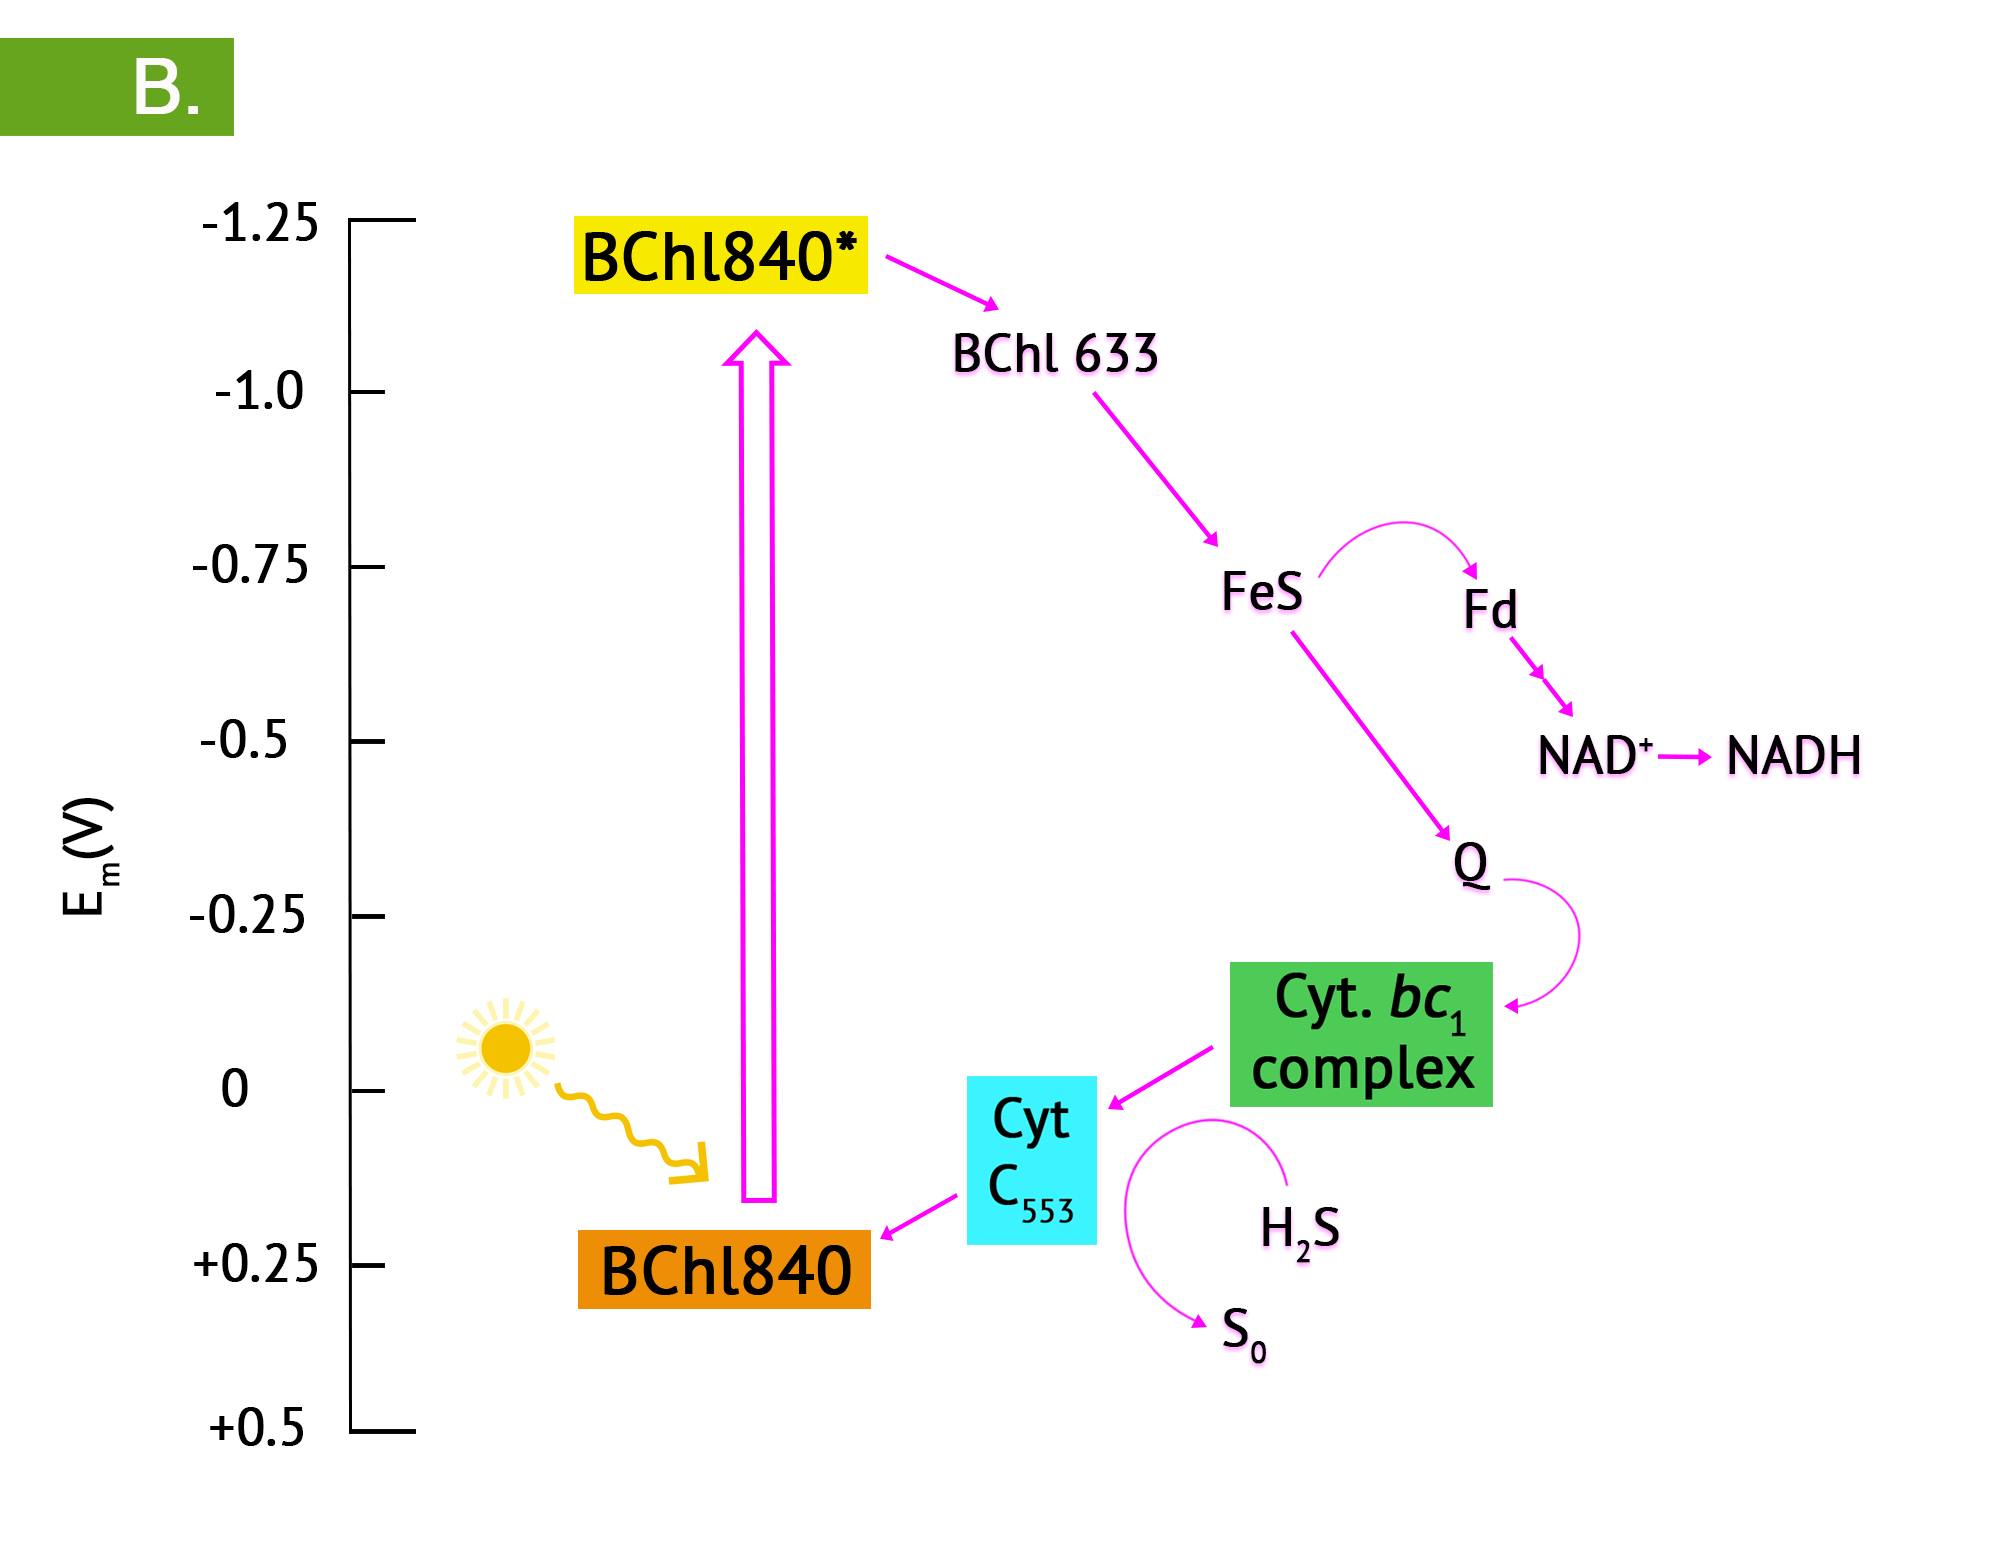 B - upon photoexcitation of the reaction centre bacteriochlorophyll, the strong reduction potential leads to the reduction of another BChl, an iron sulphur protein, then electrons either cycle back via quinones and cytochromes, or flow in an exergonic direction, to ferredoxin (Fd) and finally to NAD+. Noncyclic electron flow is accompanied by photolysis of sulphur compounds such as H2S.